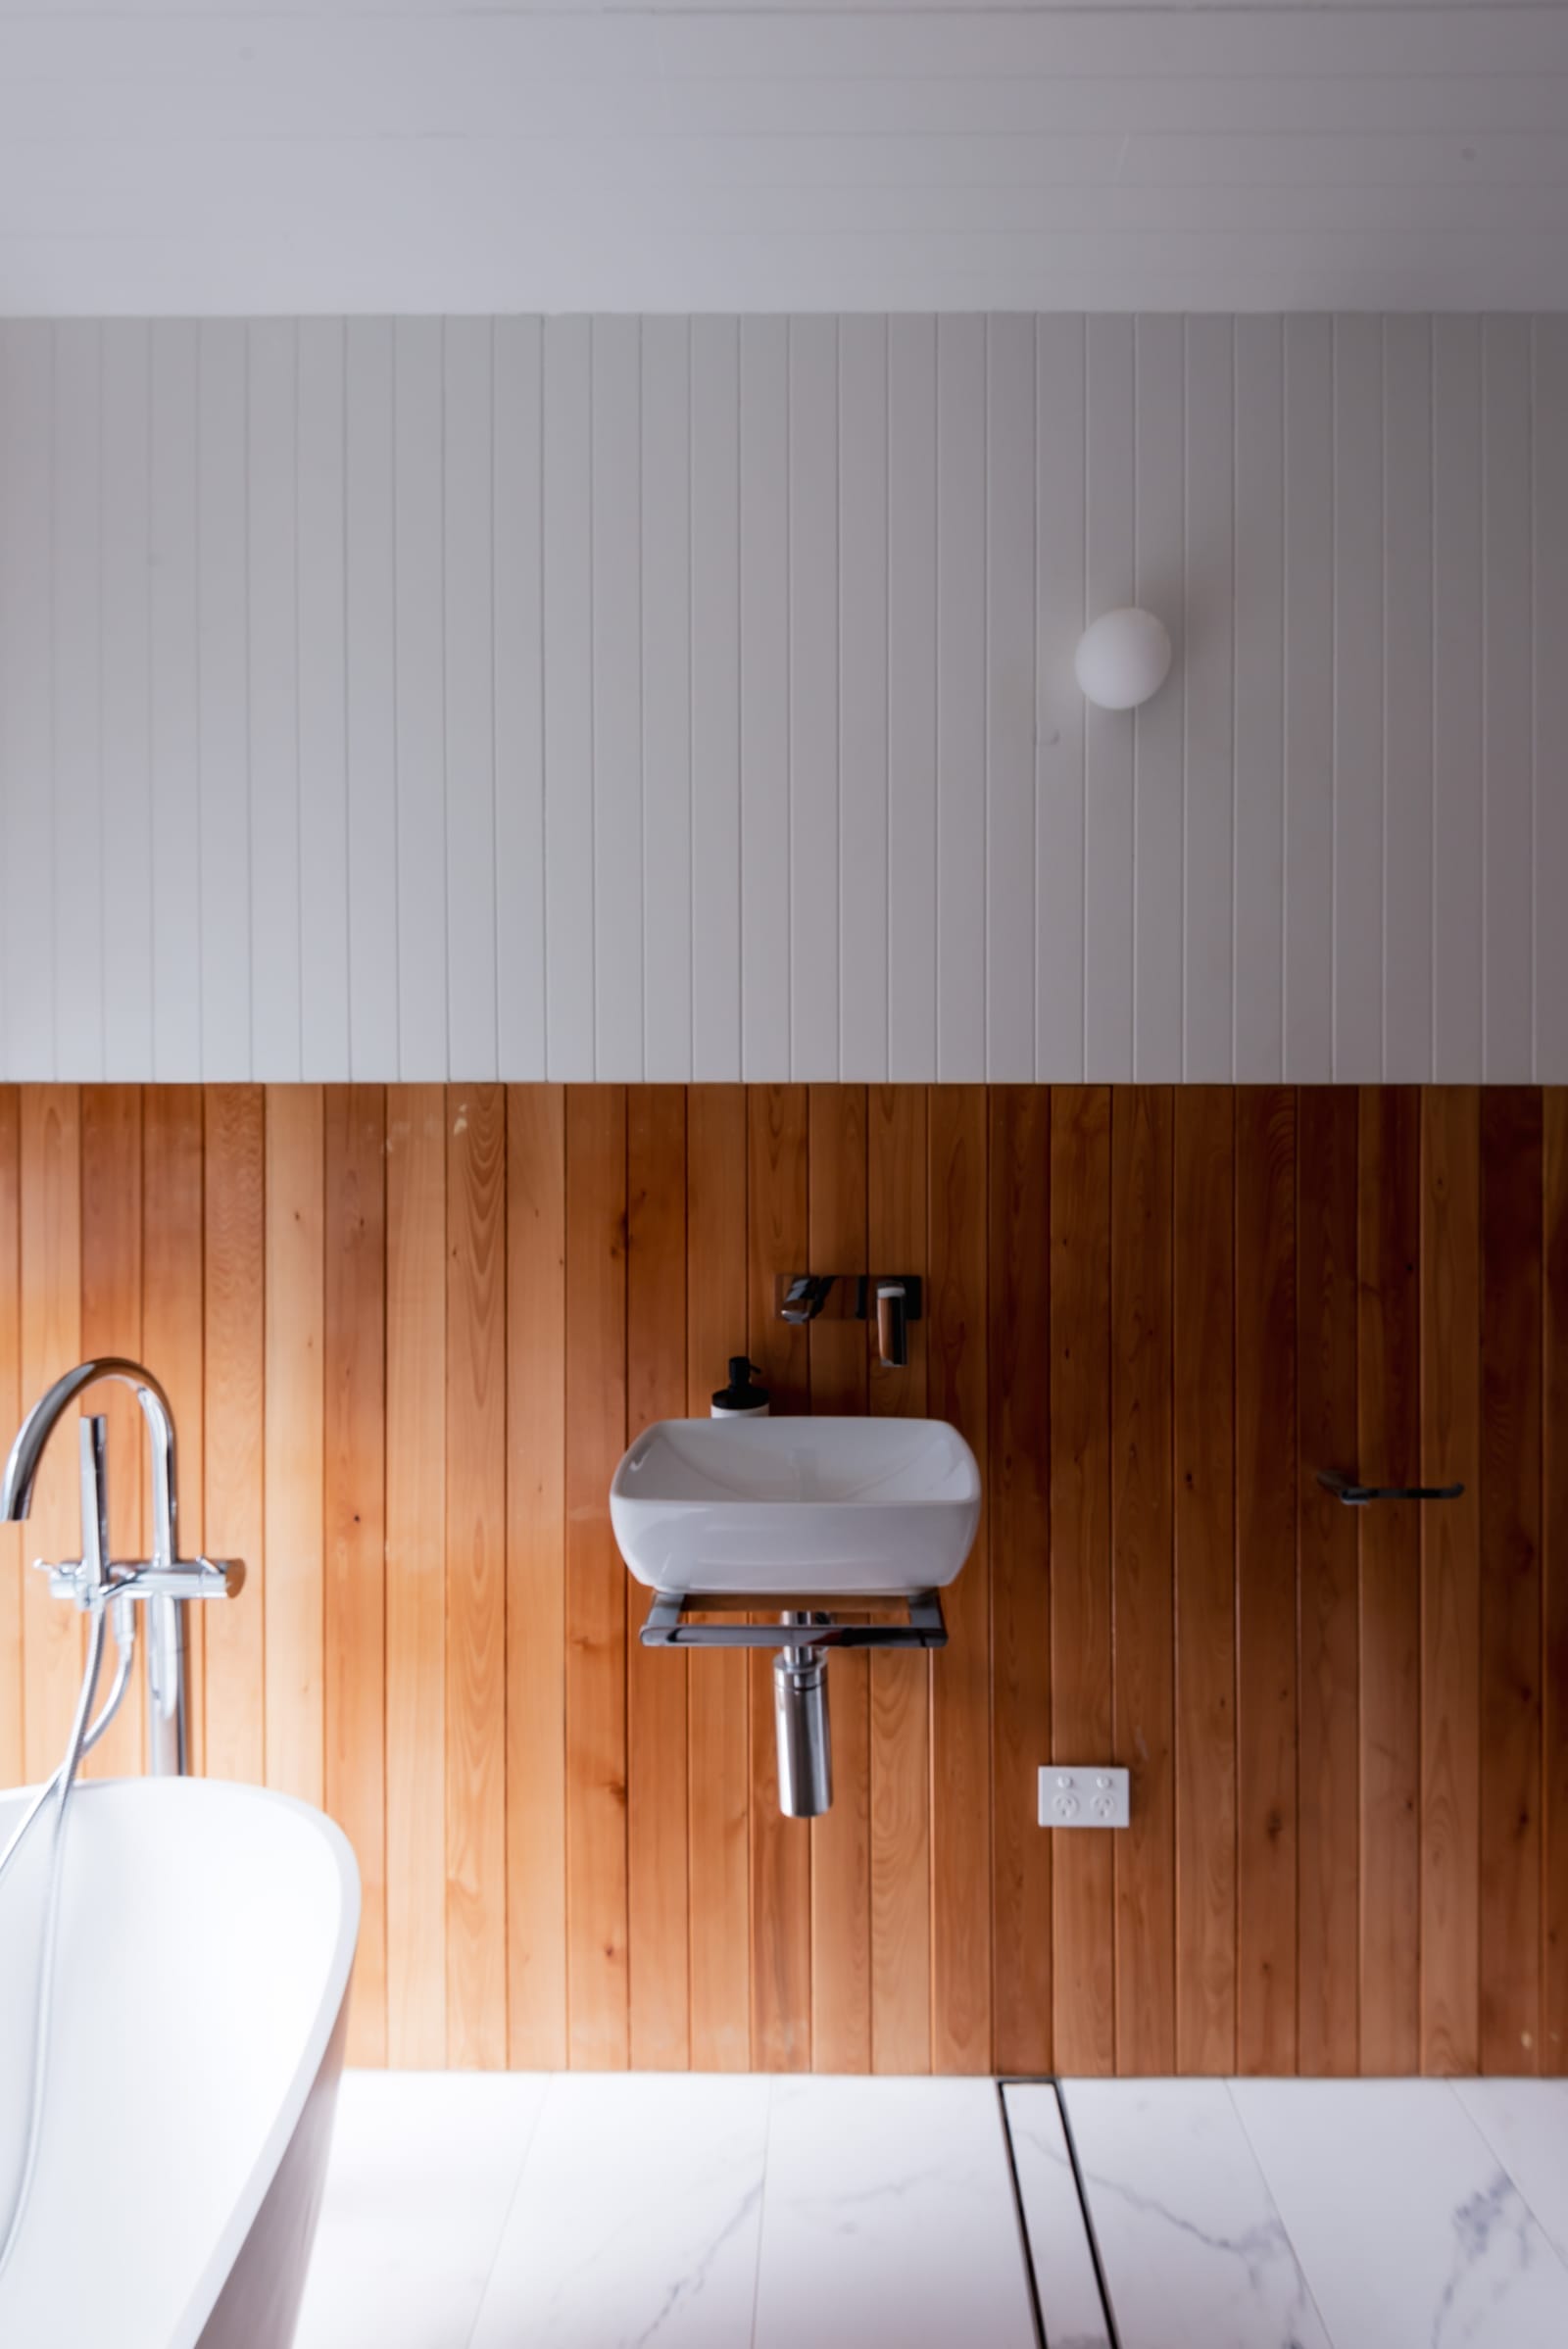 Wattle Bird House by Flett Architecture. Photography by Matt Sansom. White wall-mounted sink on timber paneled bathroom wall. Marble tiled floor. White freestanding bath to left.  